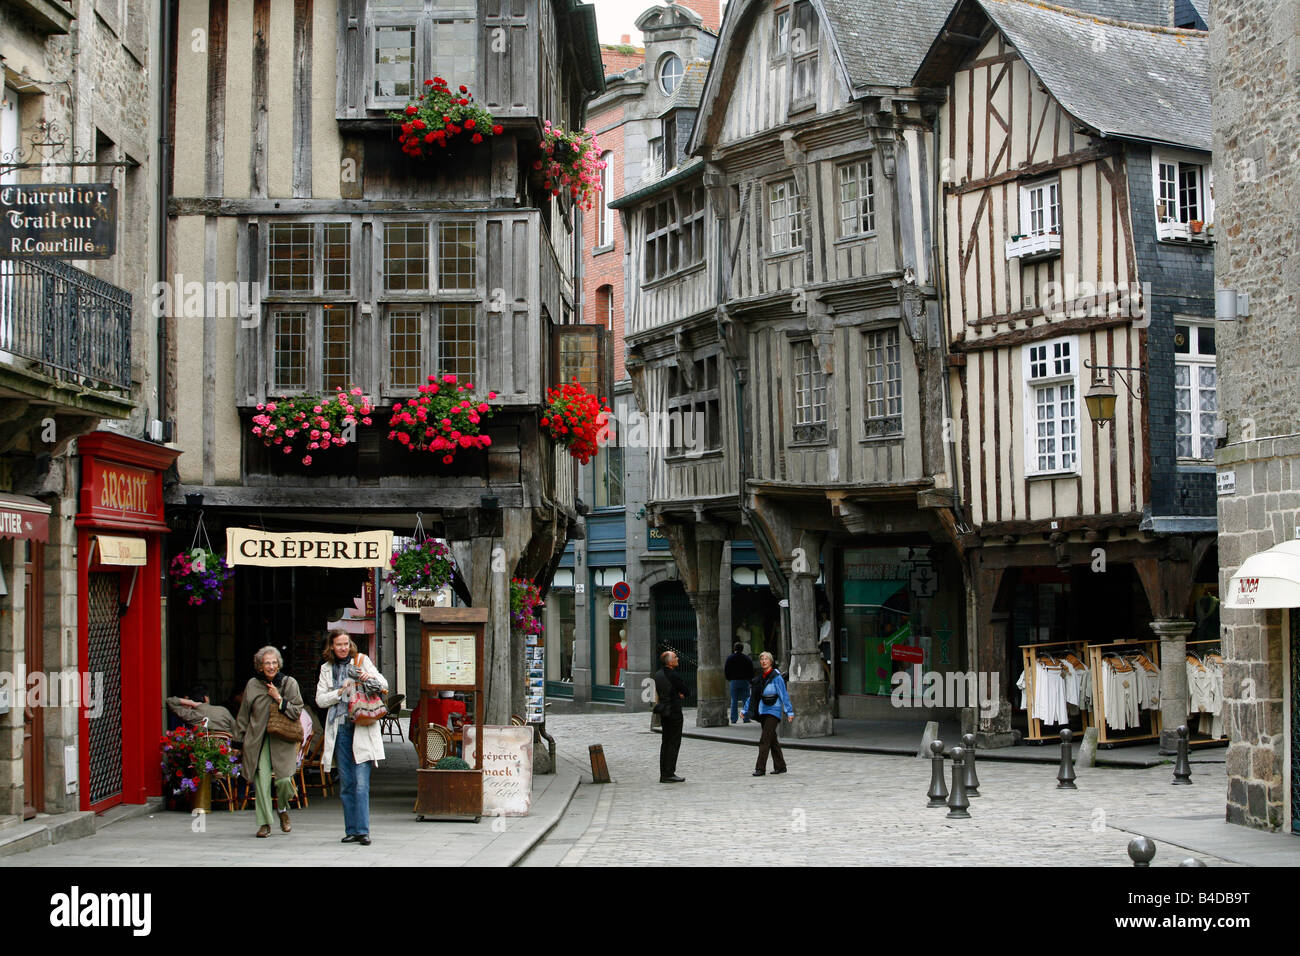 July 2008 - Half timbered houses in the old town of Dinan Brittany France Stock Photo